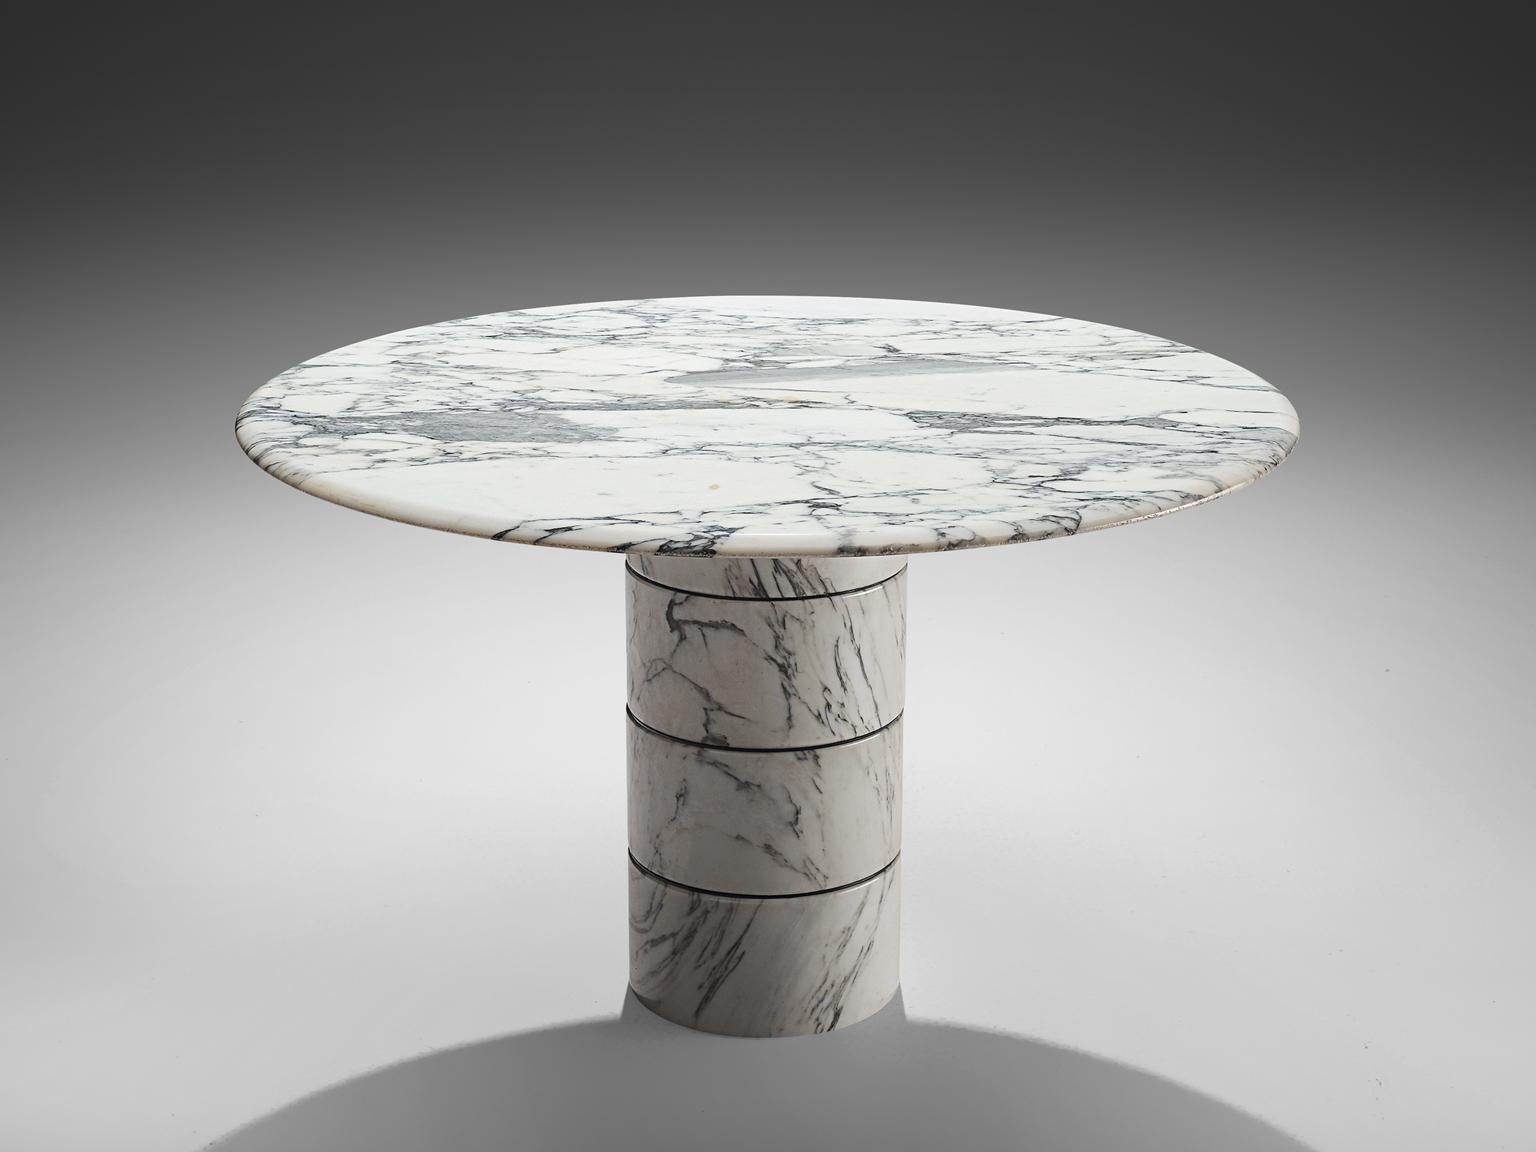 Dining table, marble, Italy, 1970s.

This architectural table is a skillful example of Italian postmodern design. The circular table has a soft edge and rests on a circular pedestal. This foot features no joints or clamps and is architectural in